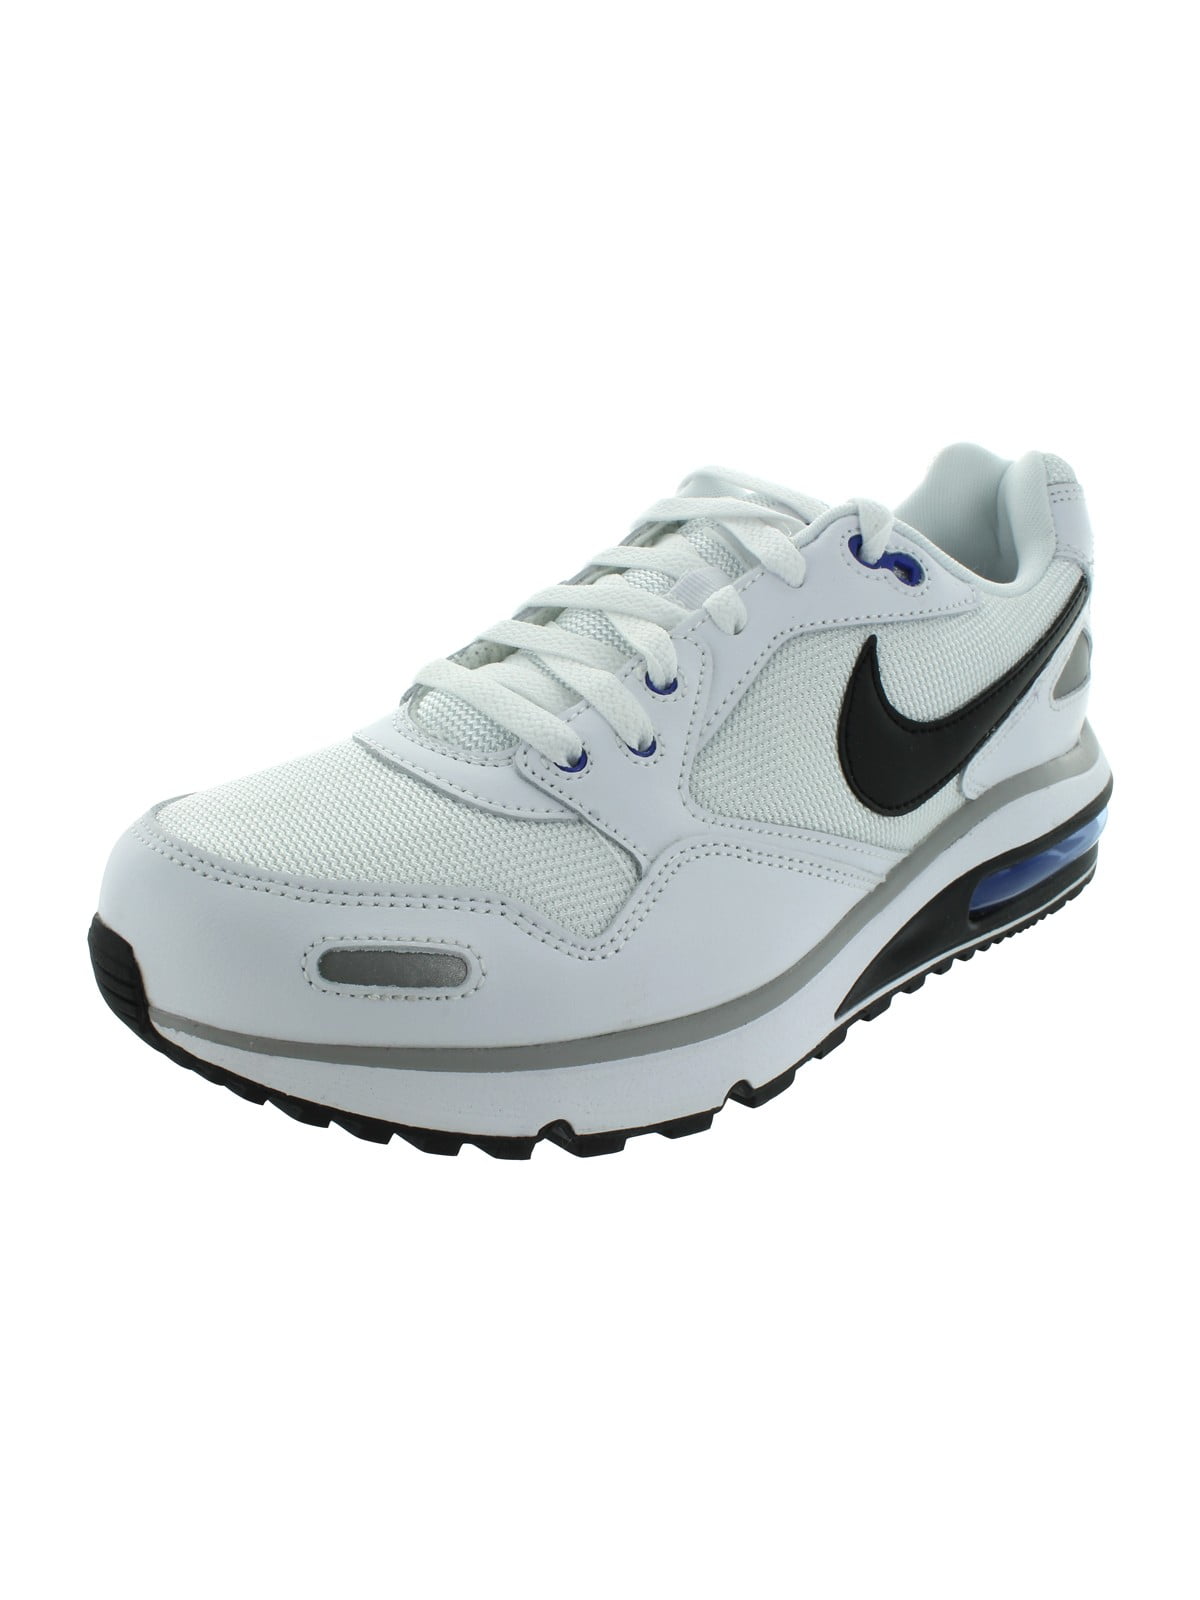 NIKE AIR MAX DIRECT RUNNING SHOES 